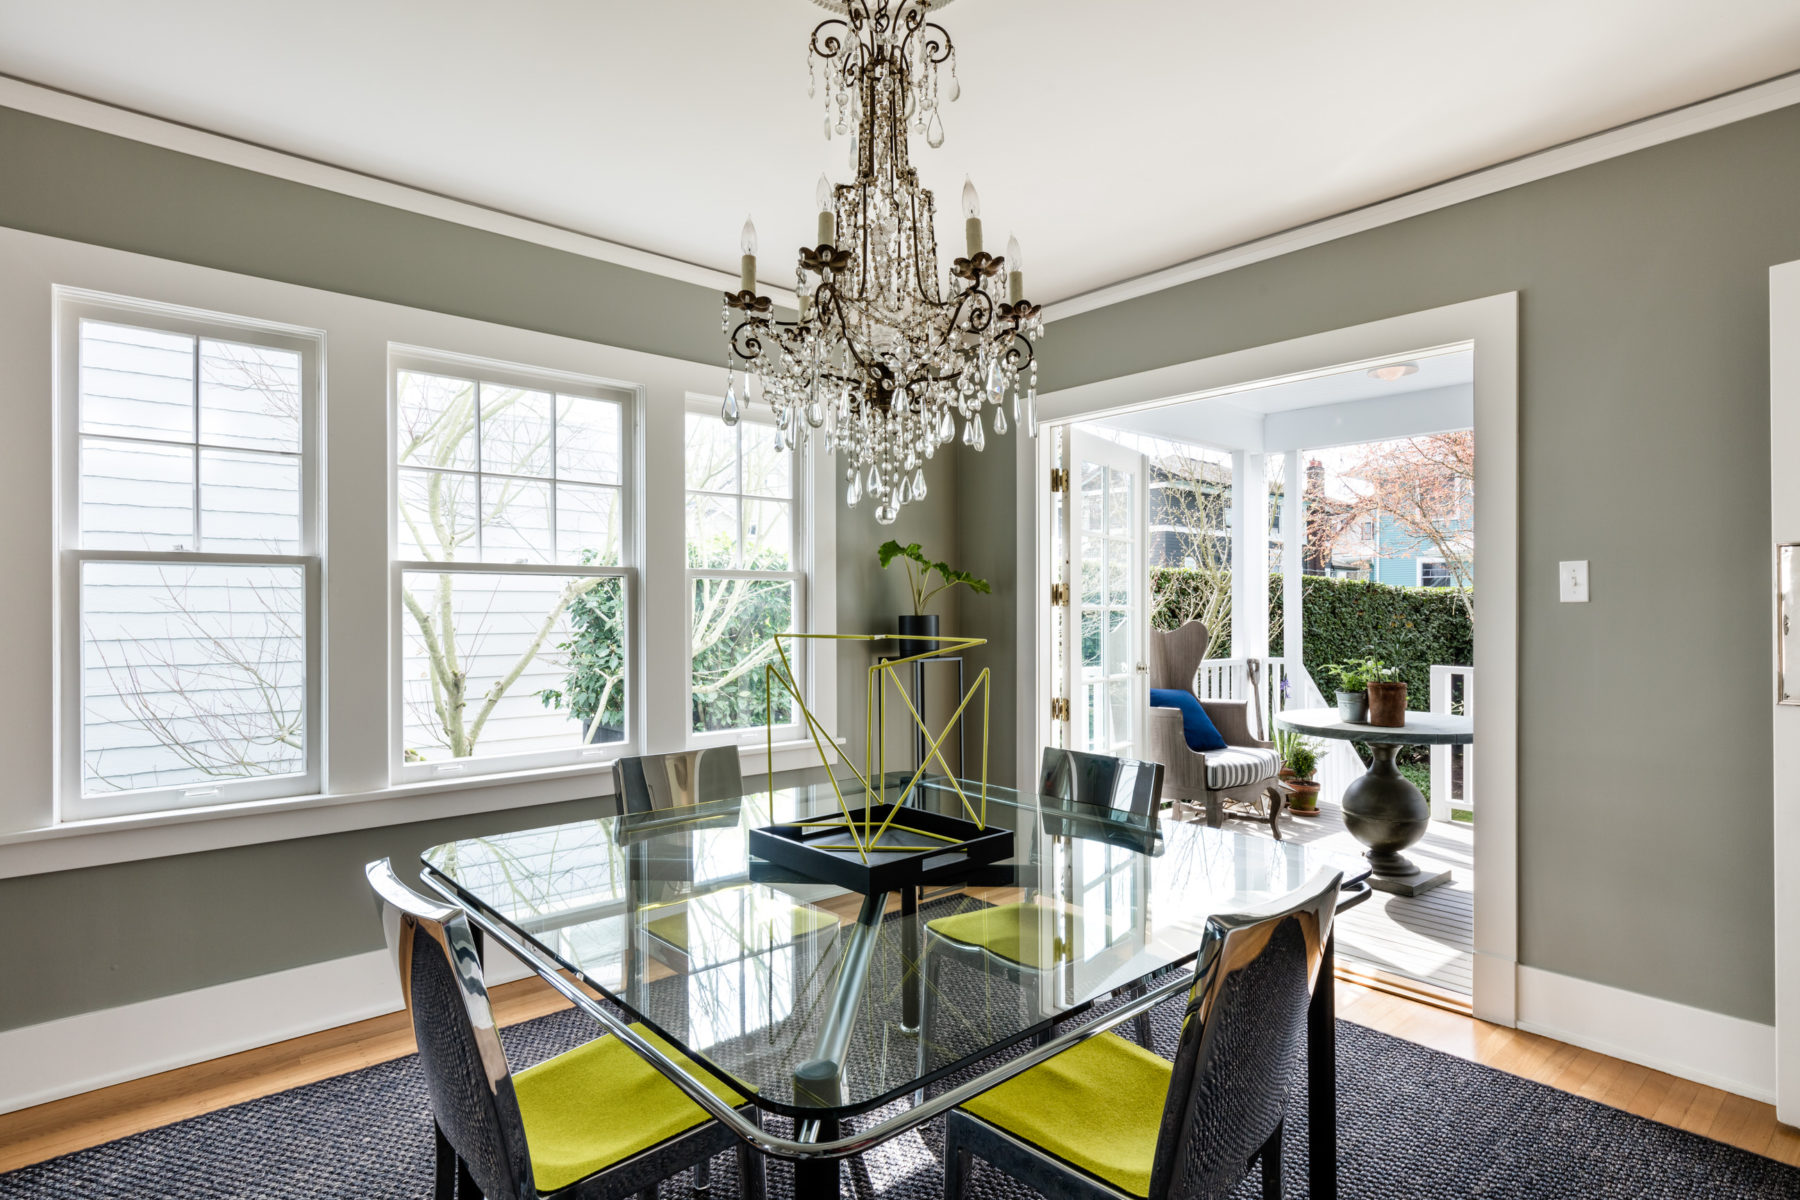 Madrona Colonial Dining